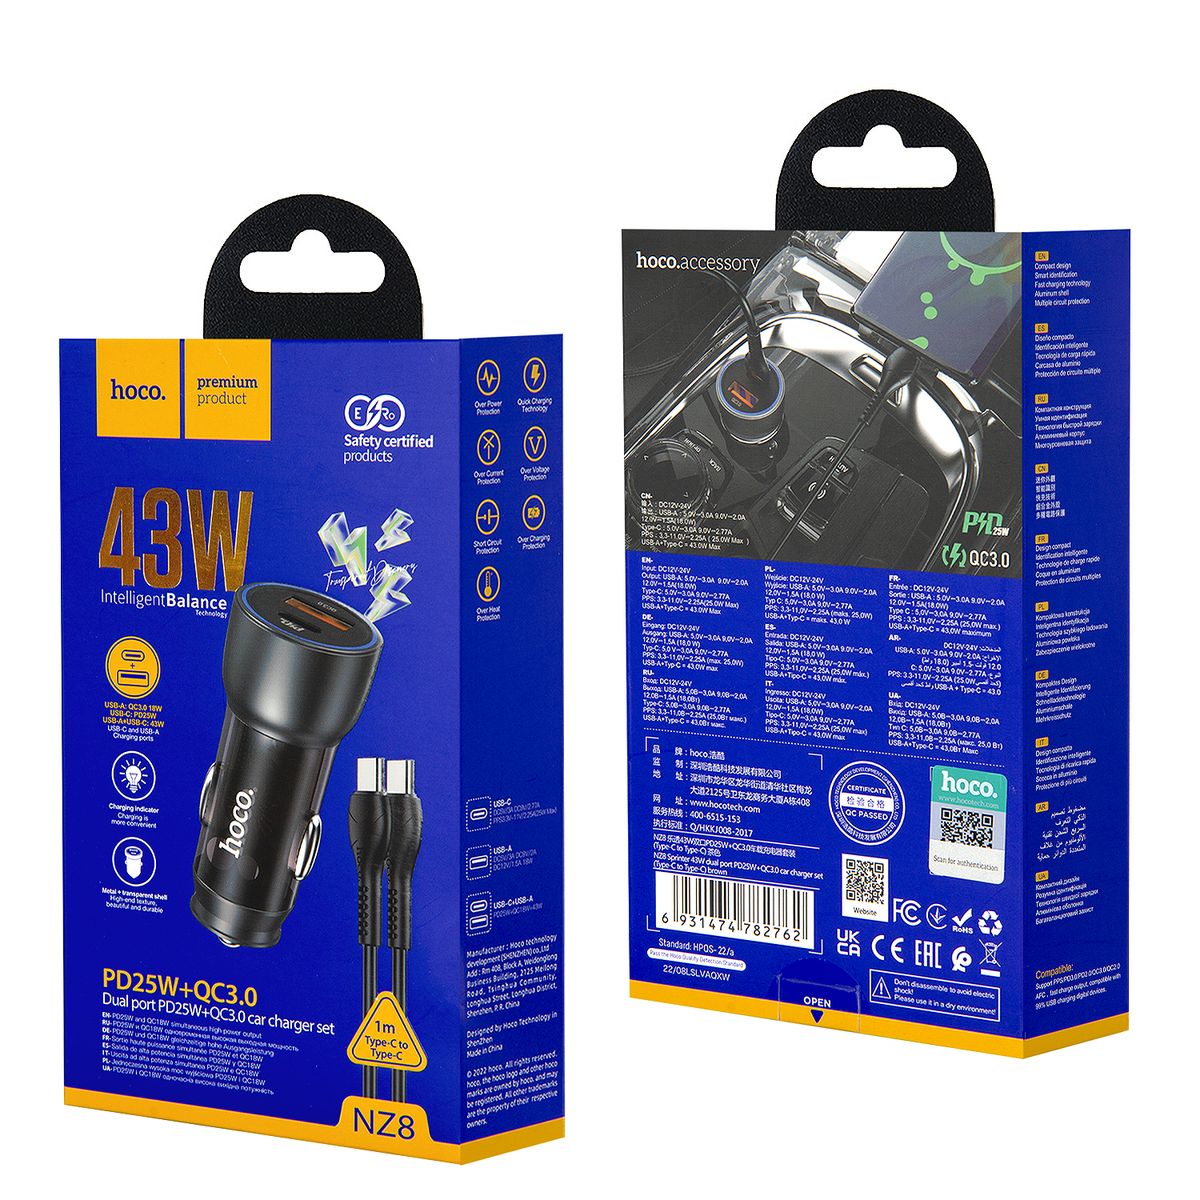 HOCO Compact Car Charger NZ8